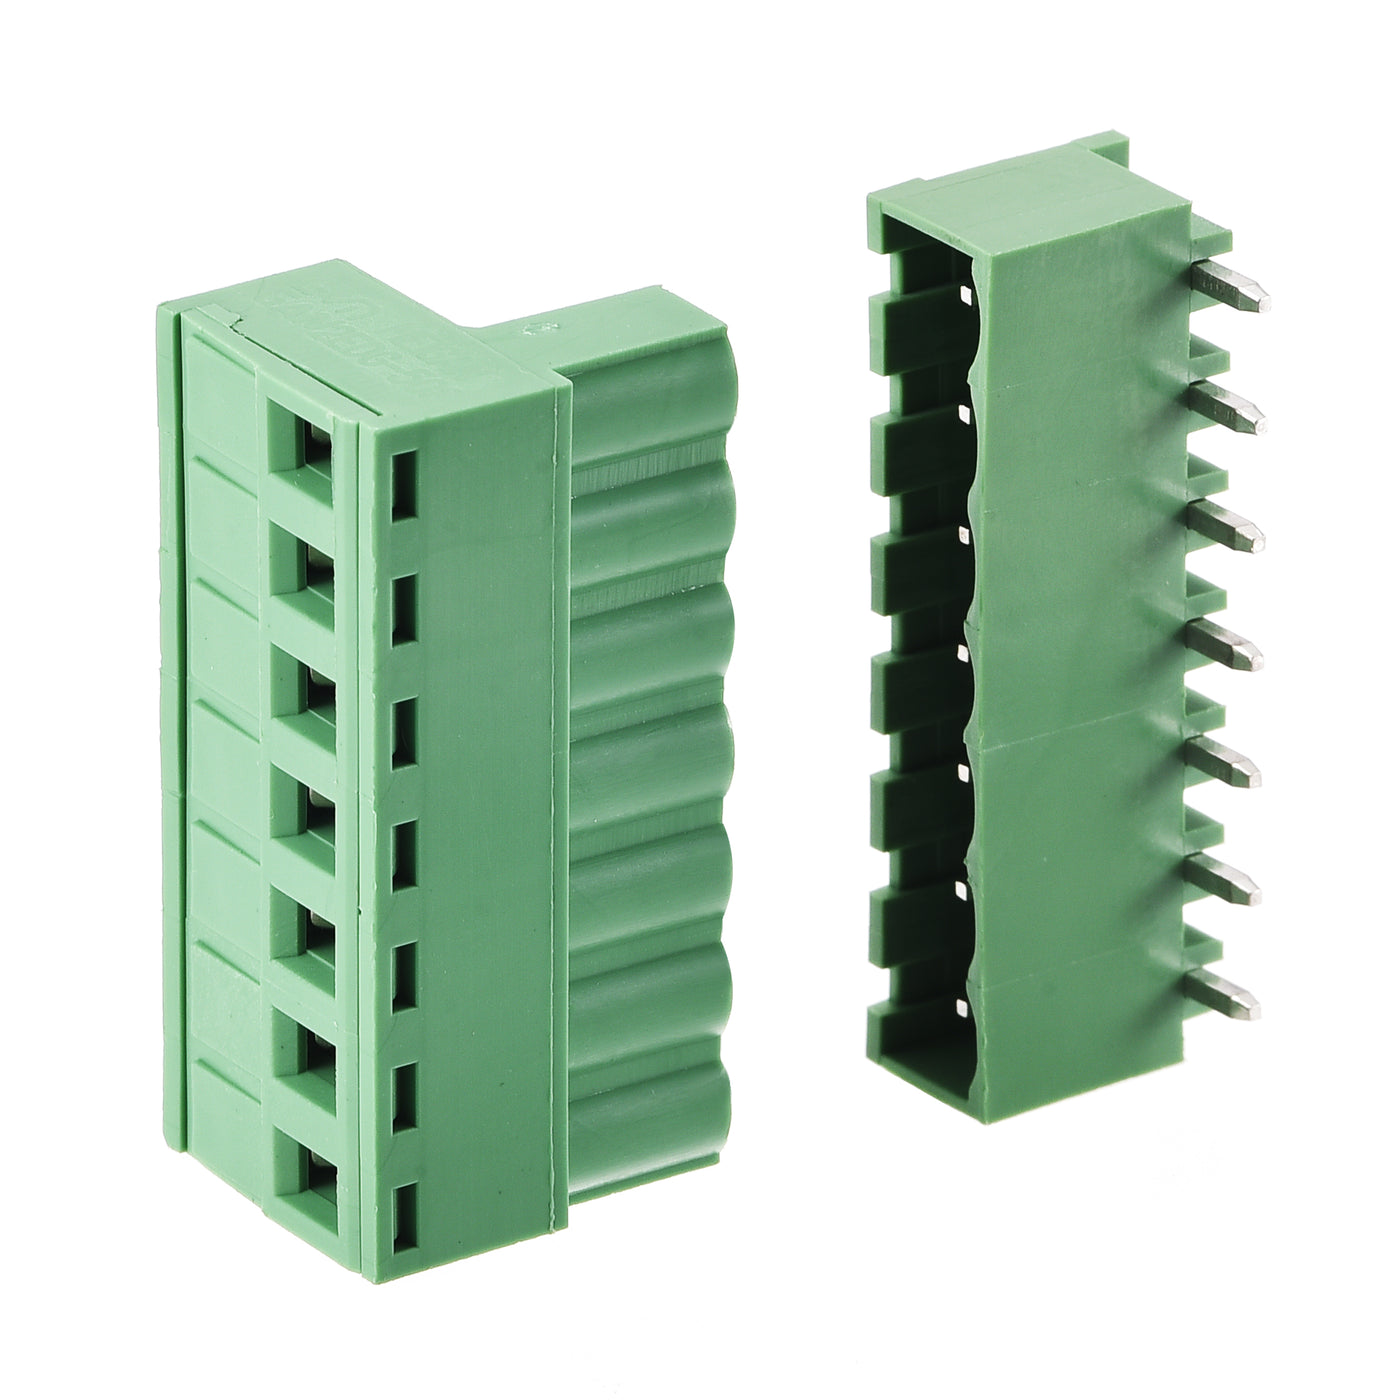 uxcell Uxcell 7-Pin 5.08mm Pitch Right Angle PCB Screw Terminal Block Connector 5 Sets